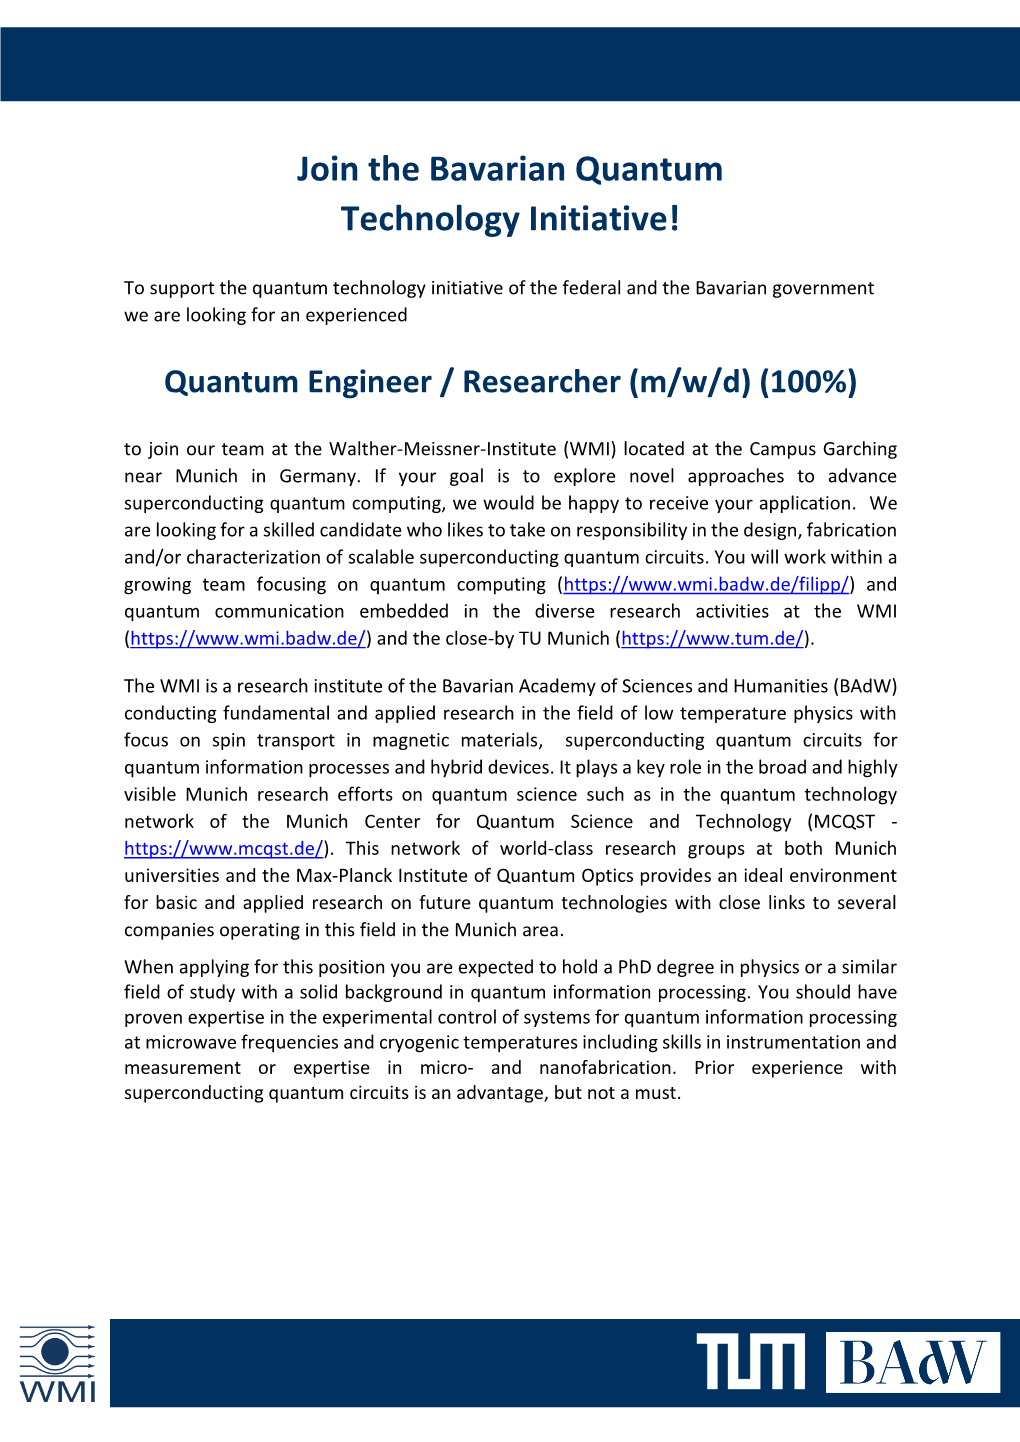 Join the Bavarian Quantum Technology Initiative!